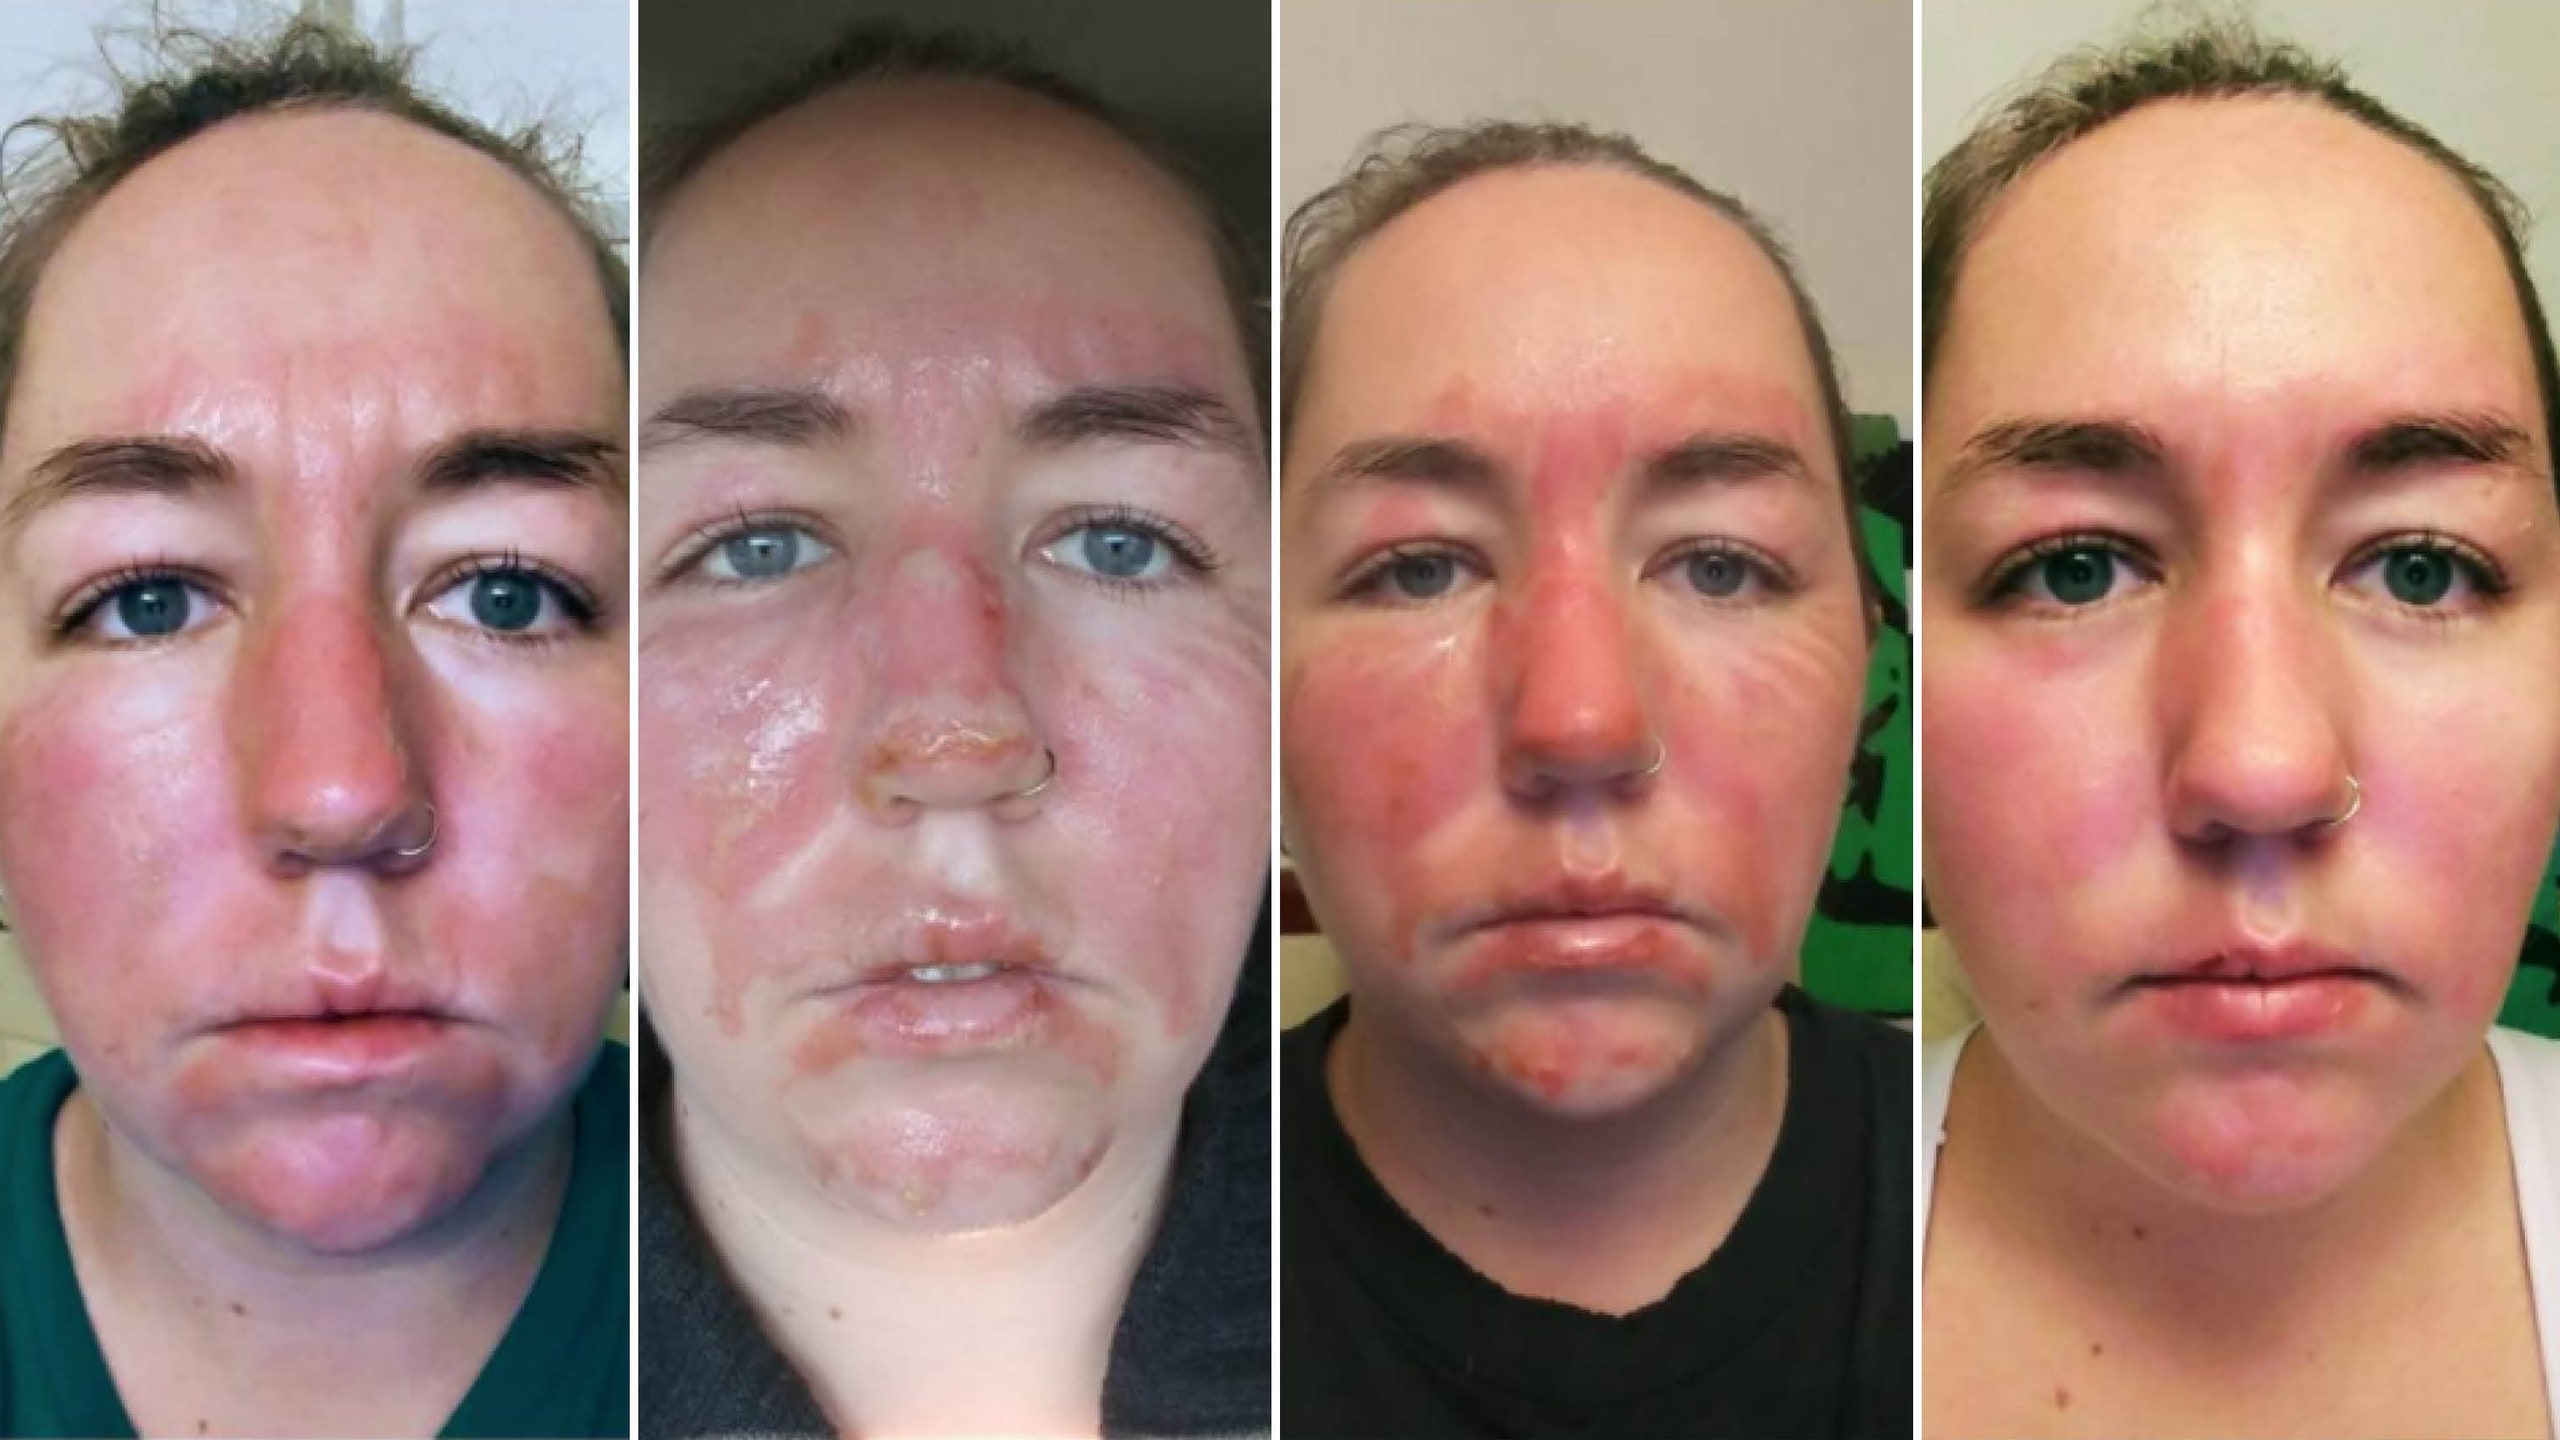 Before and after image facial burns